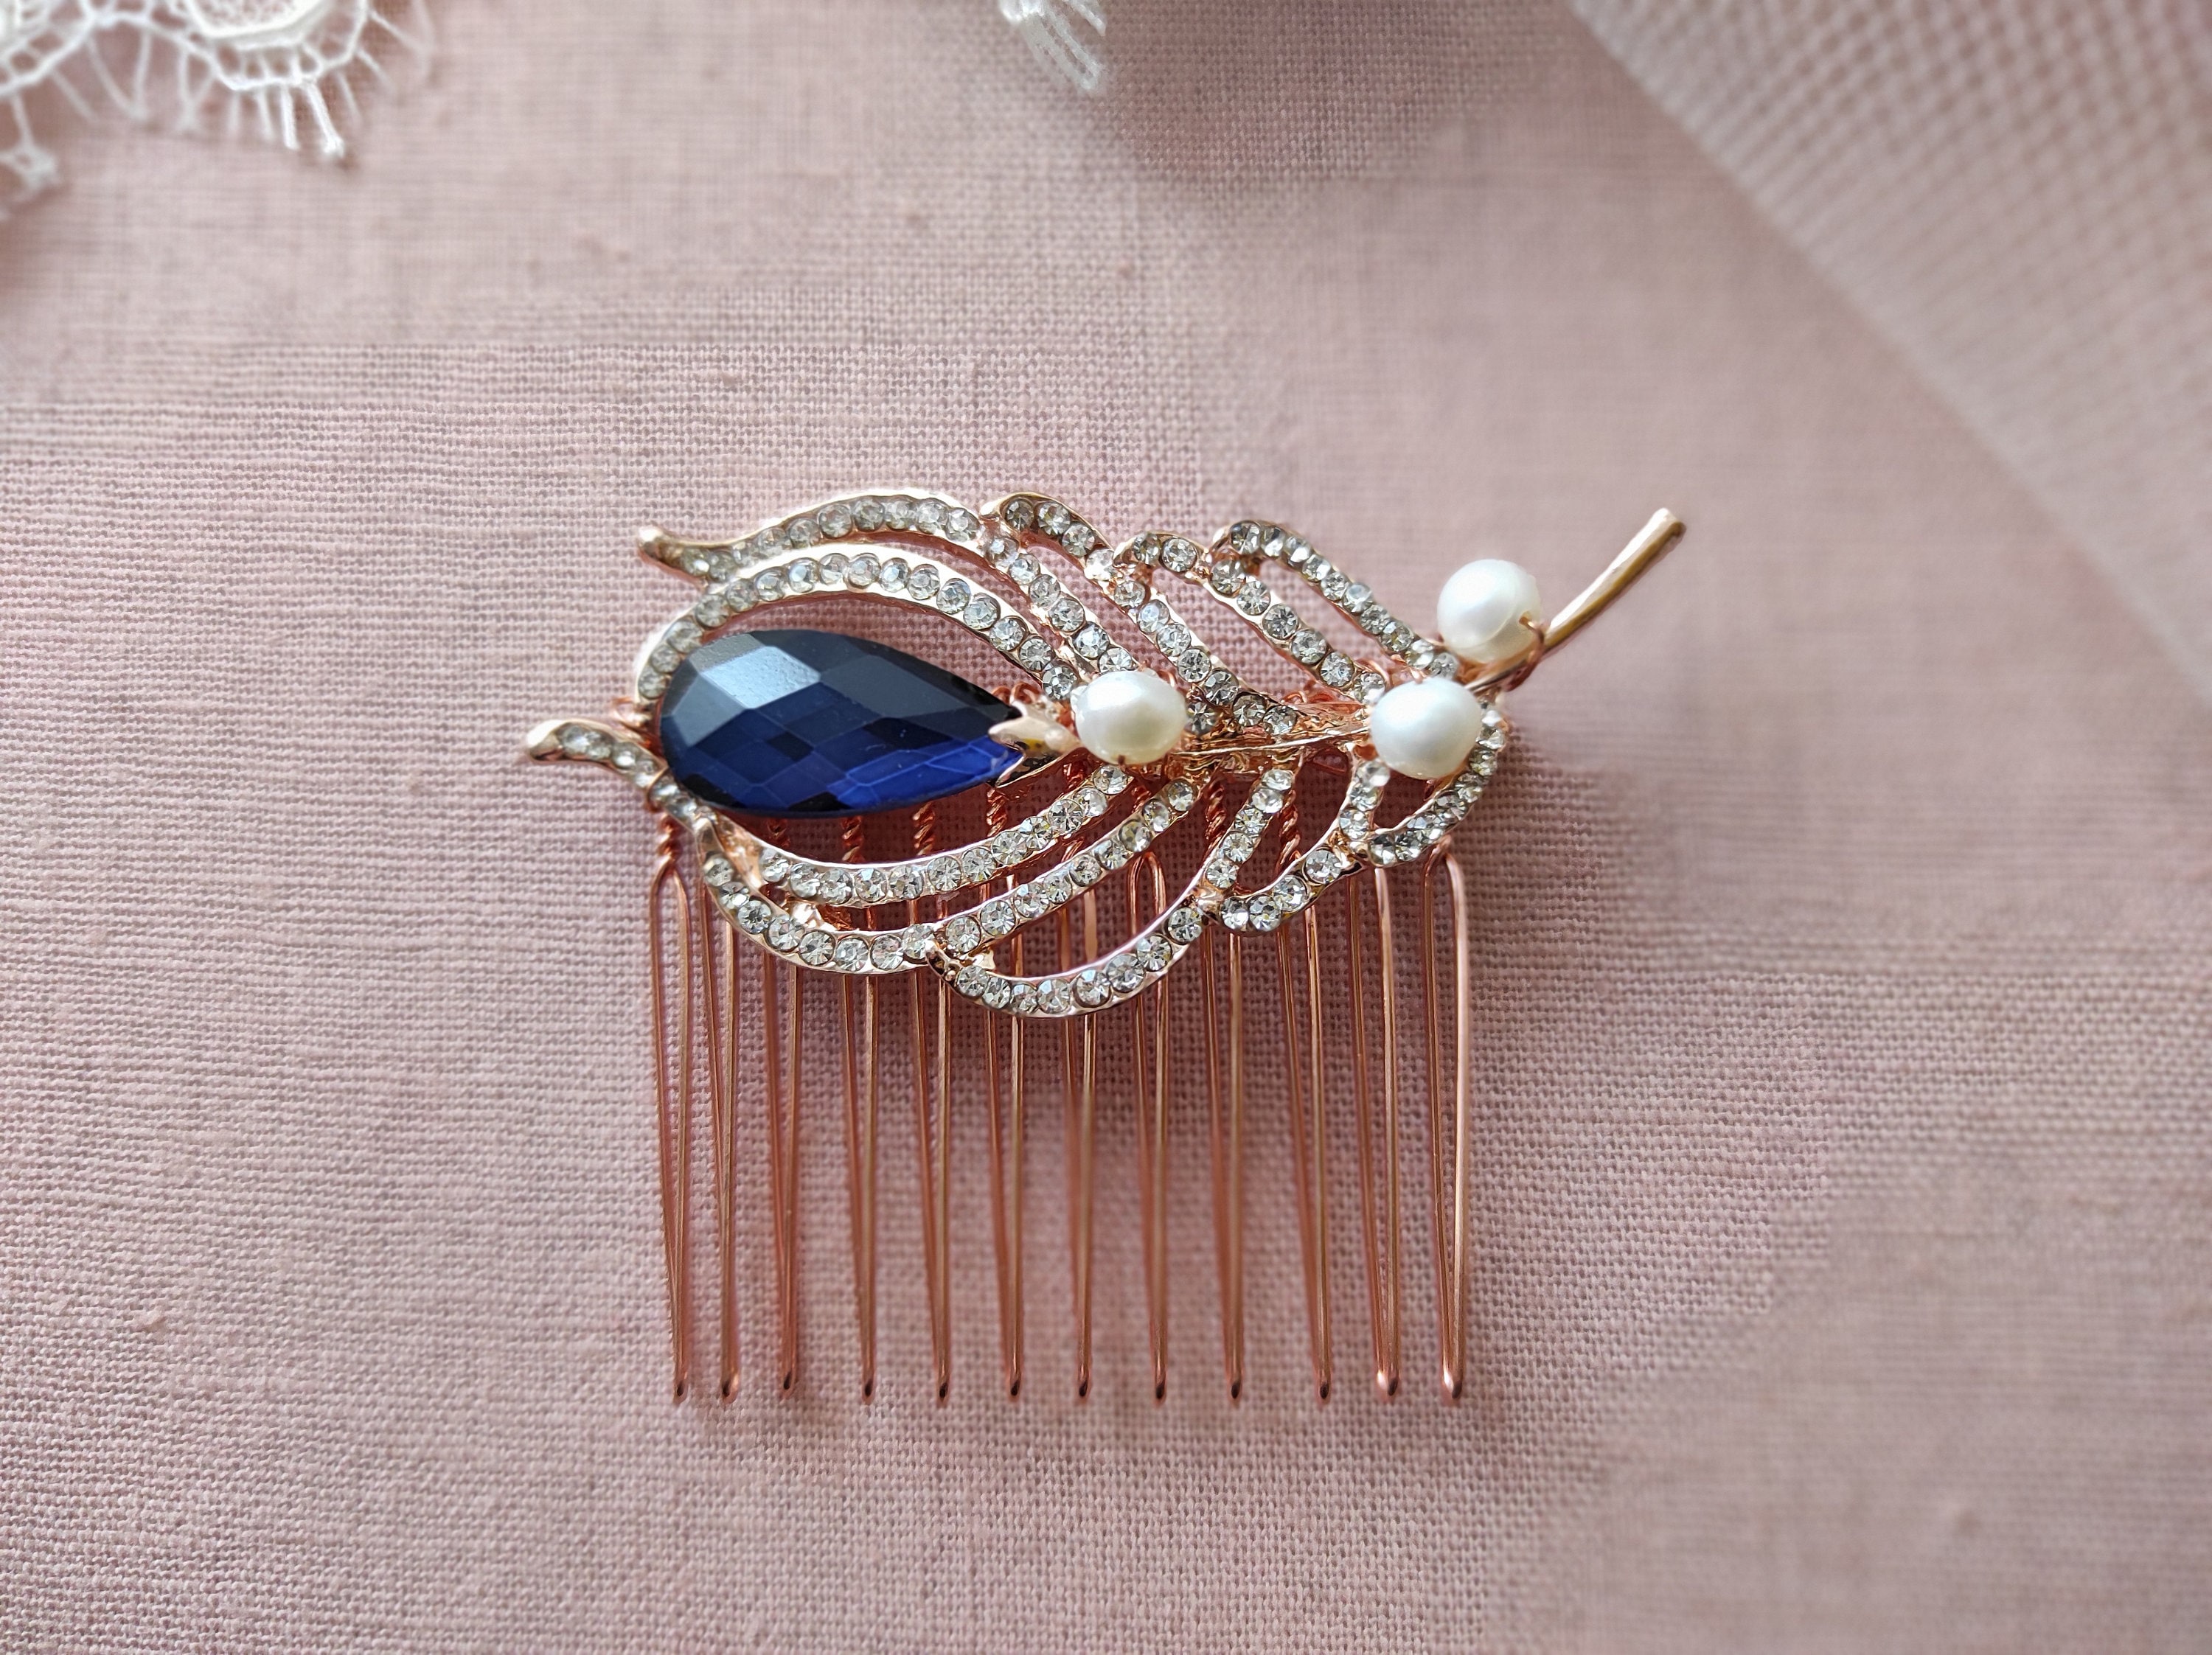 2. Handmade Rose Gold and Blue Hair Comb by The Honeycomb Shop - wide 1